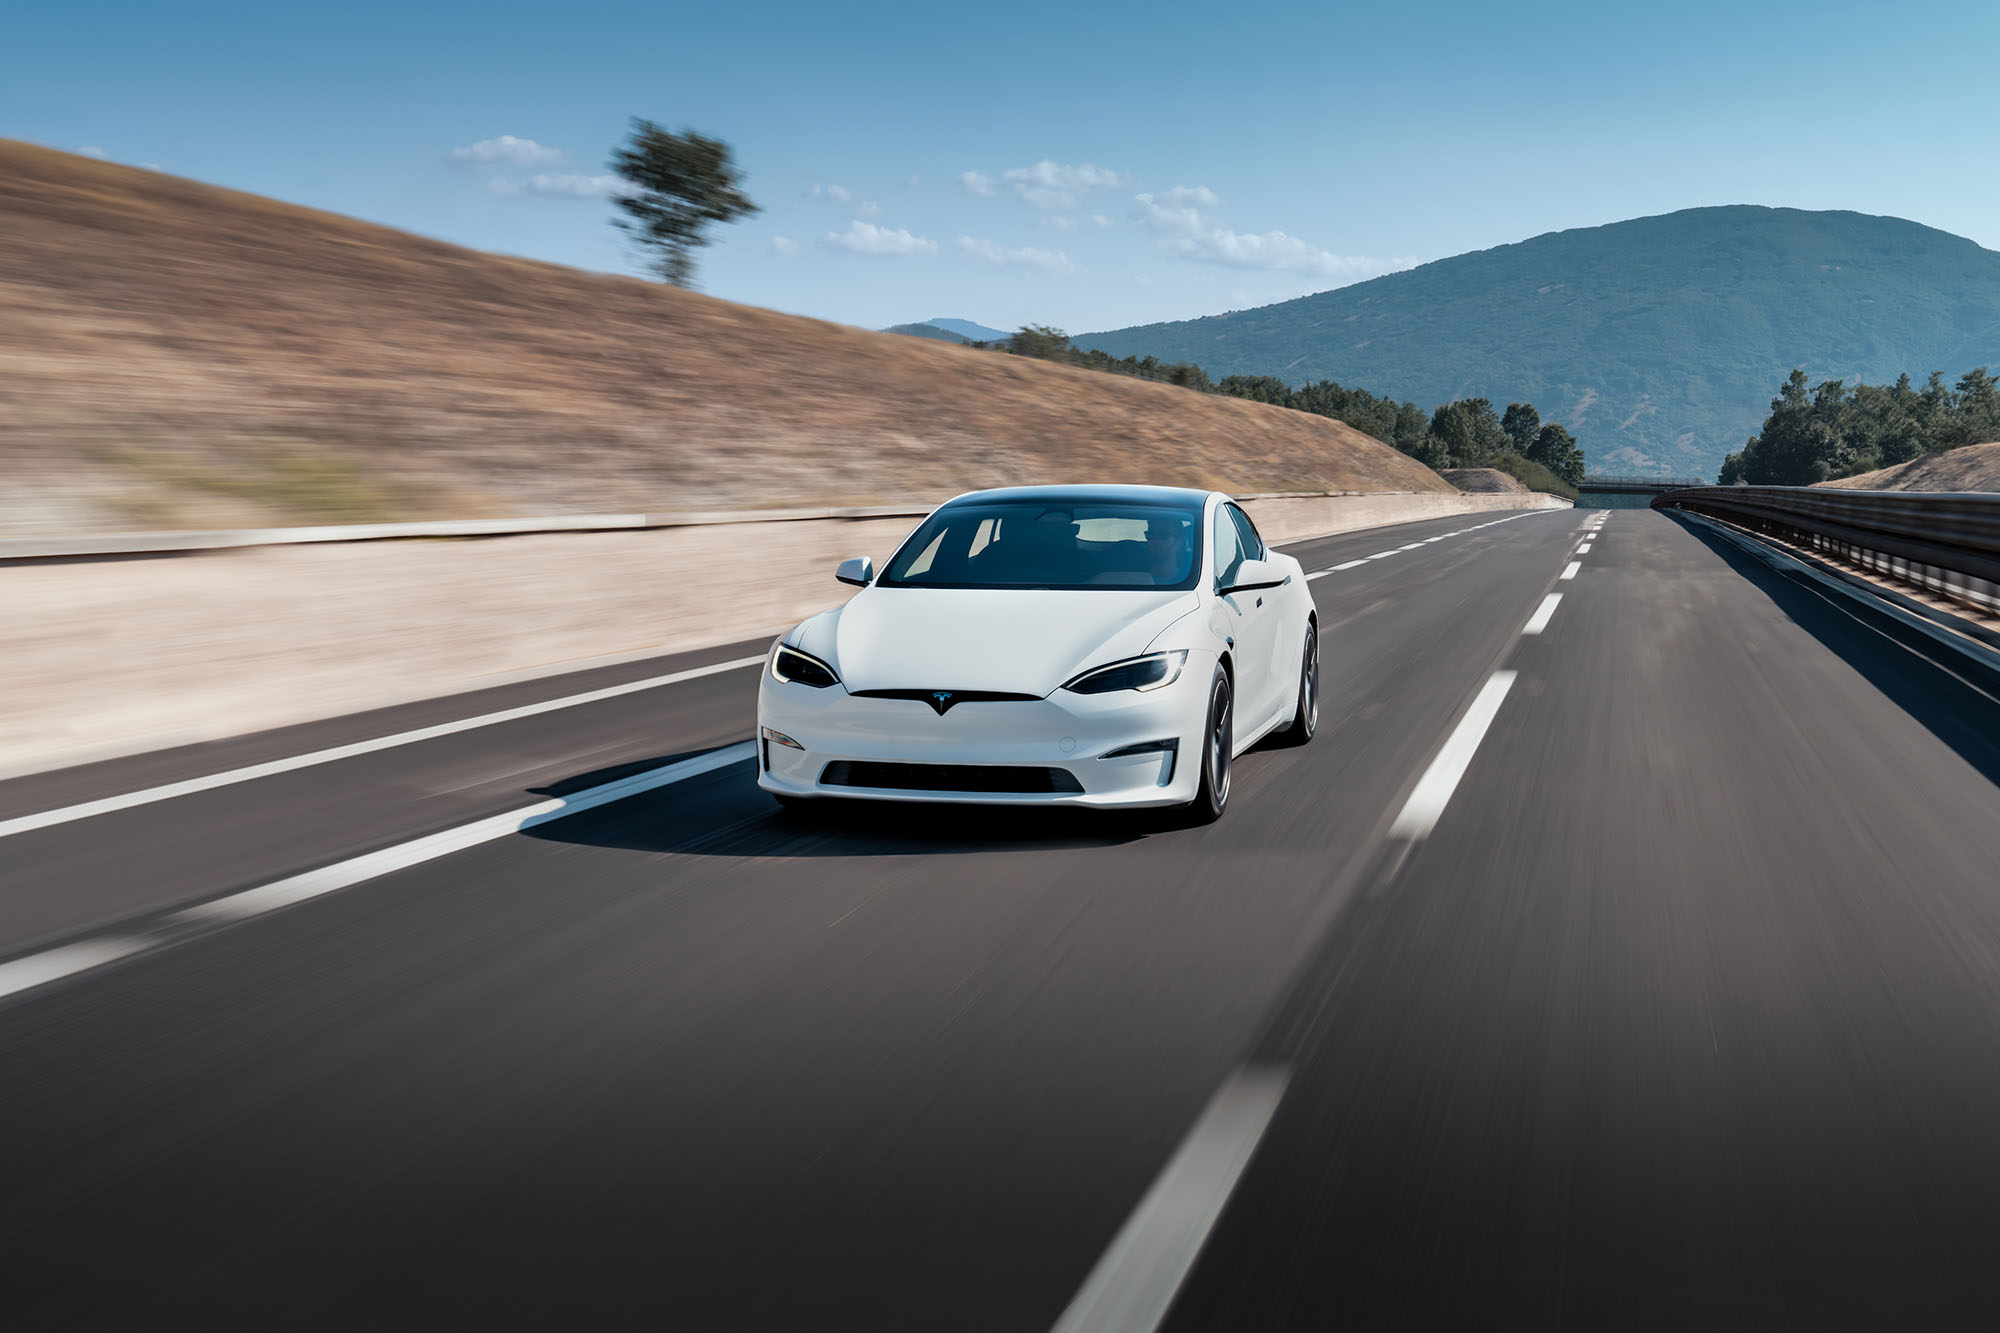 White Tesla Model S driving on paved road with mountains in the background.